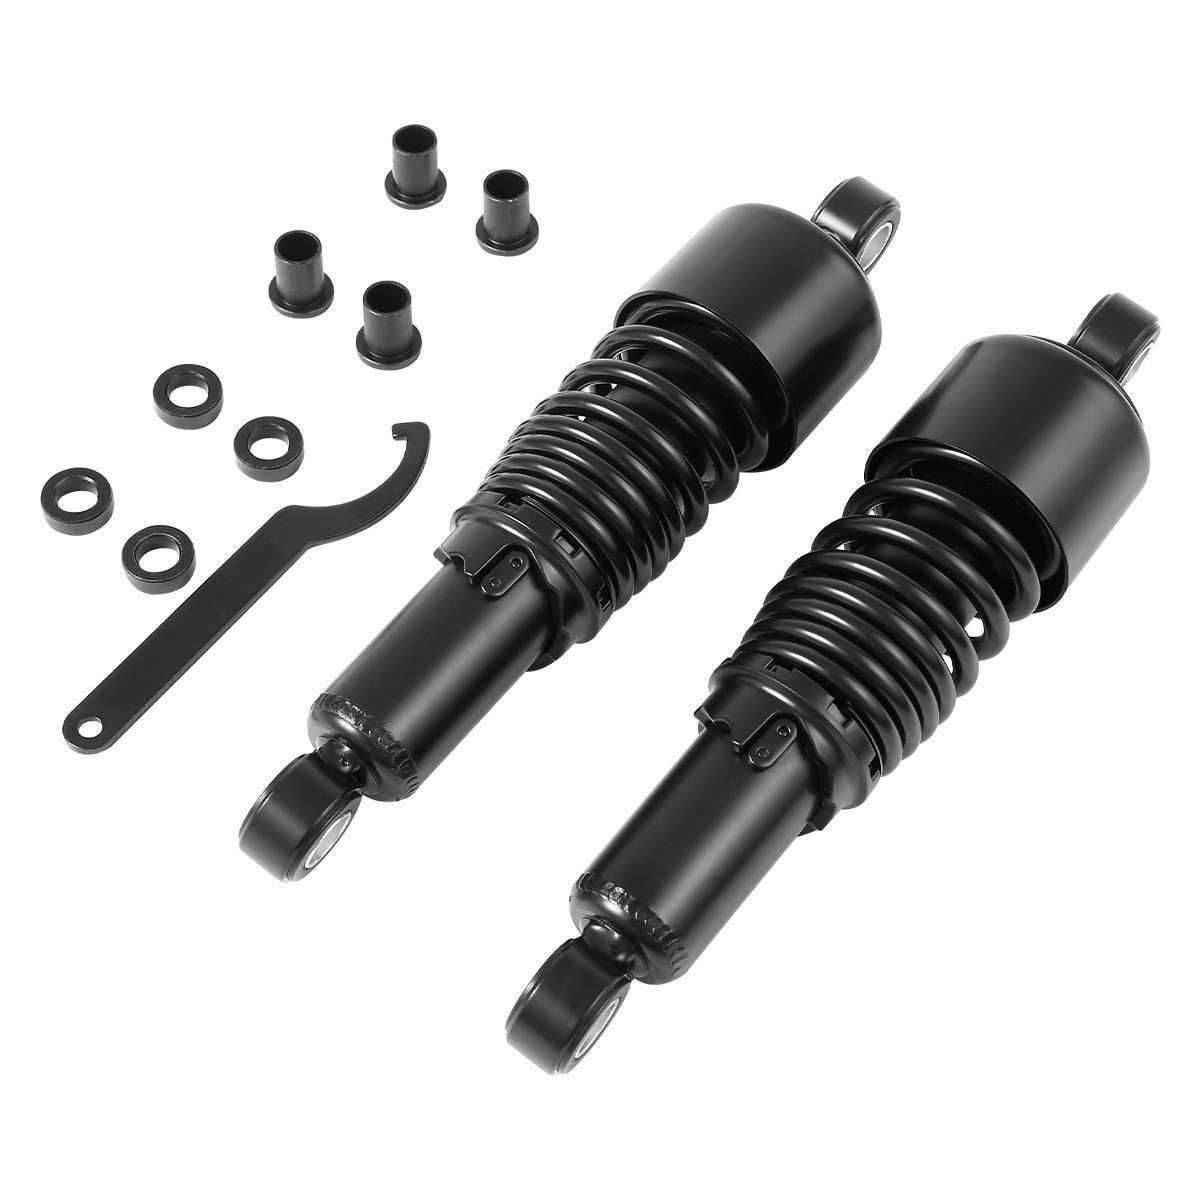 Pair 10.5'' 267mm Black Rear Shocks Fit For Harley Davidson Sportster 883 1200 - Moto Life Products